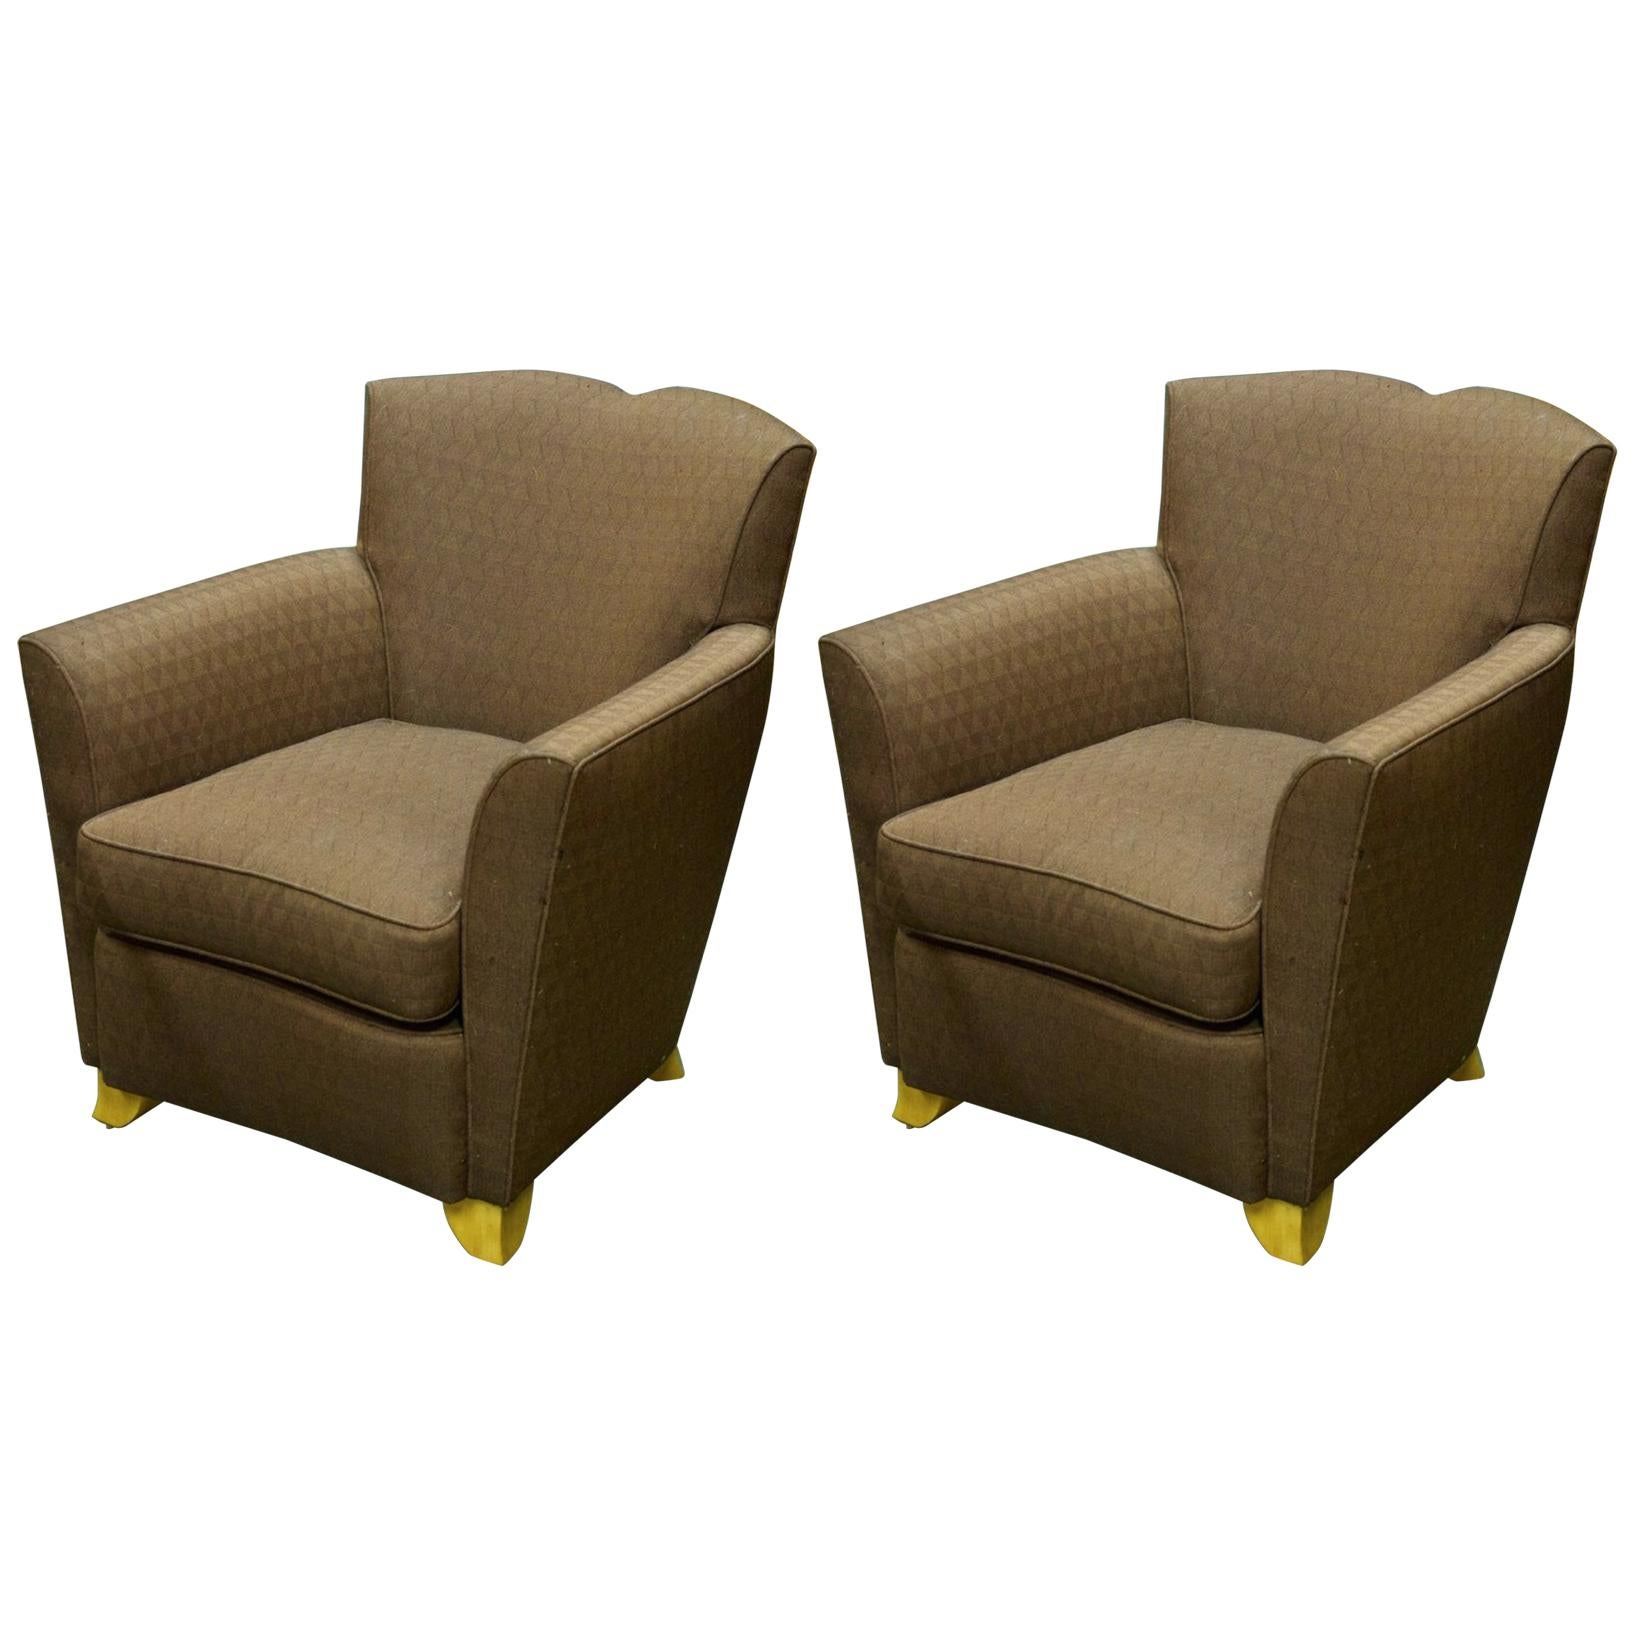 Dominique Pair of "Mustache" Club Chairs For Sale